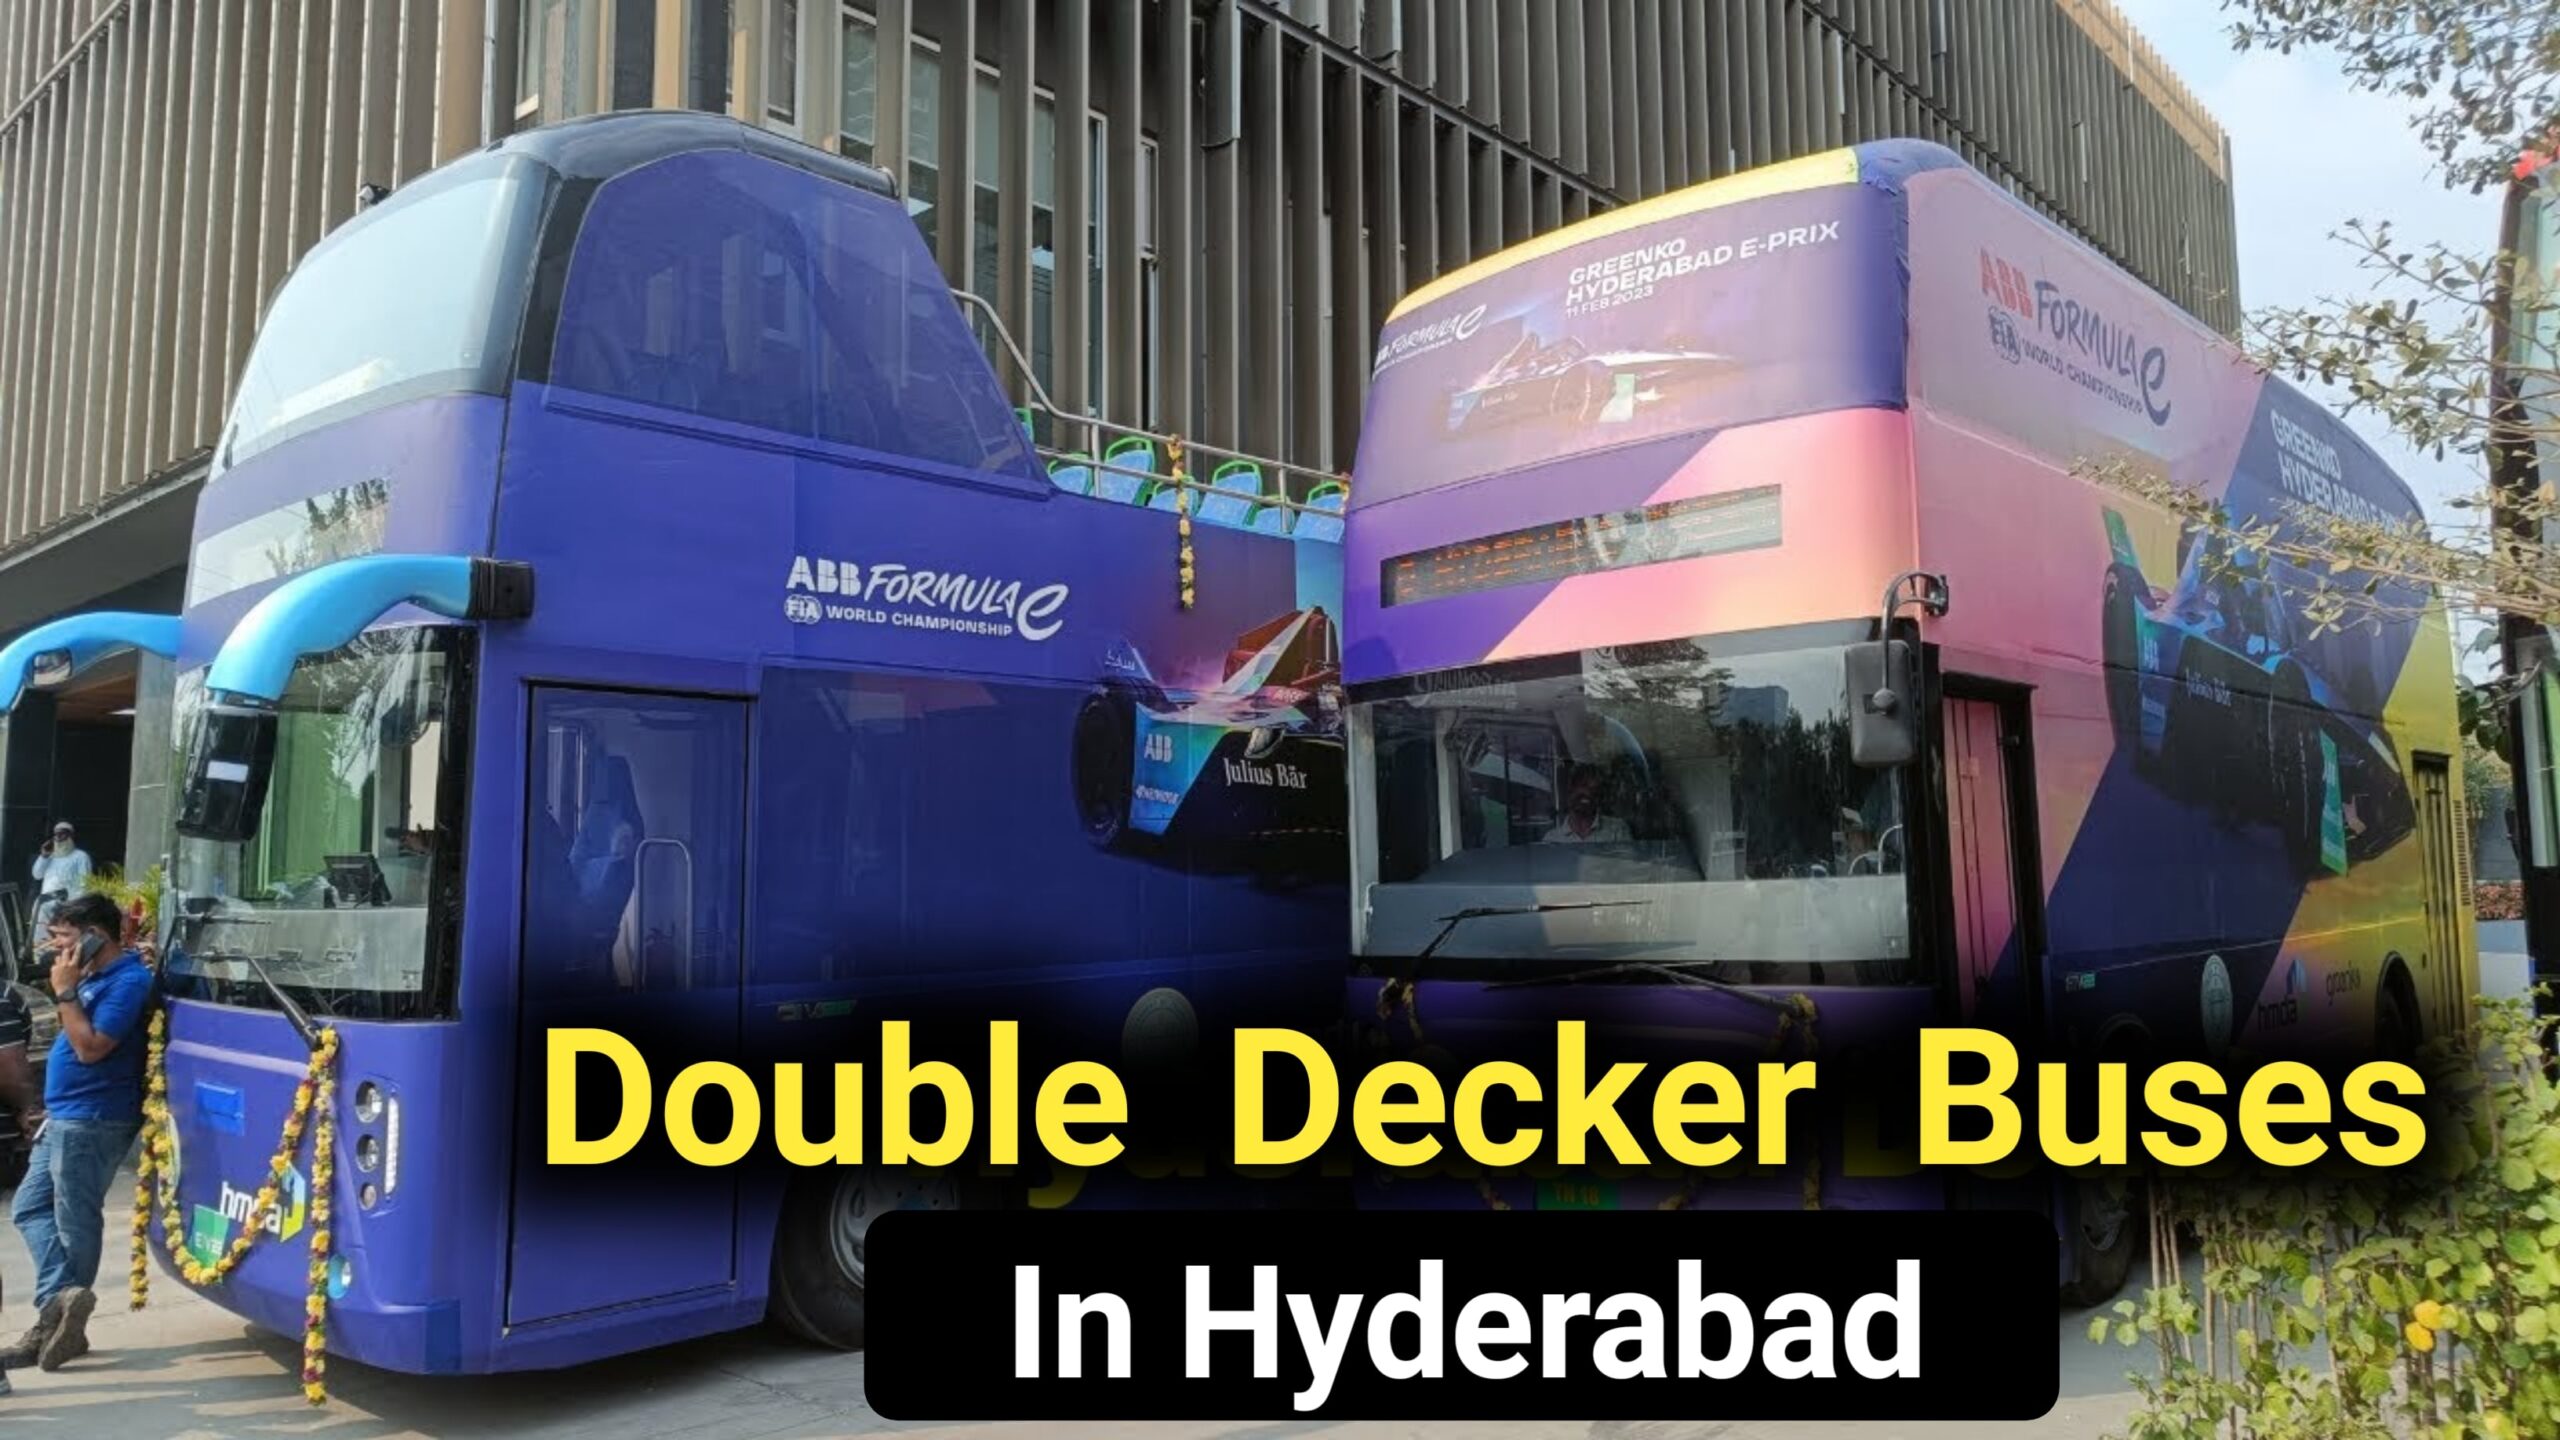 double decker buses in hyderabad telangana state